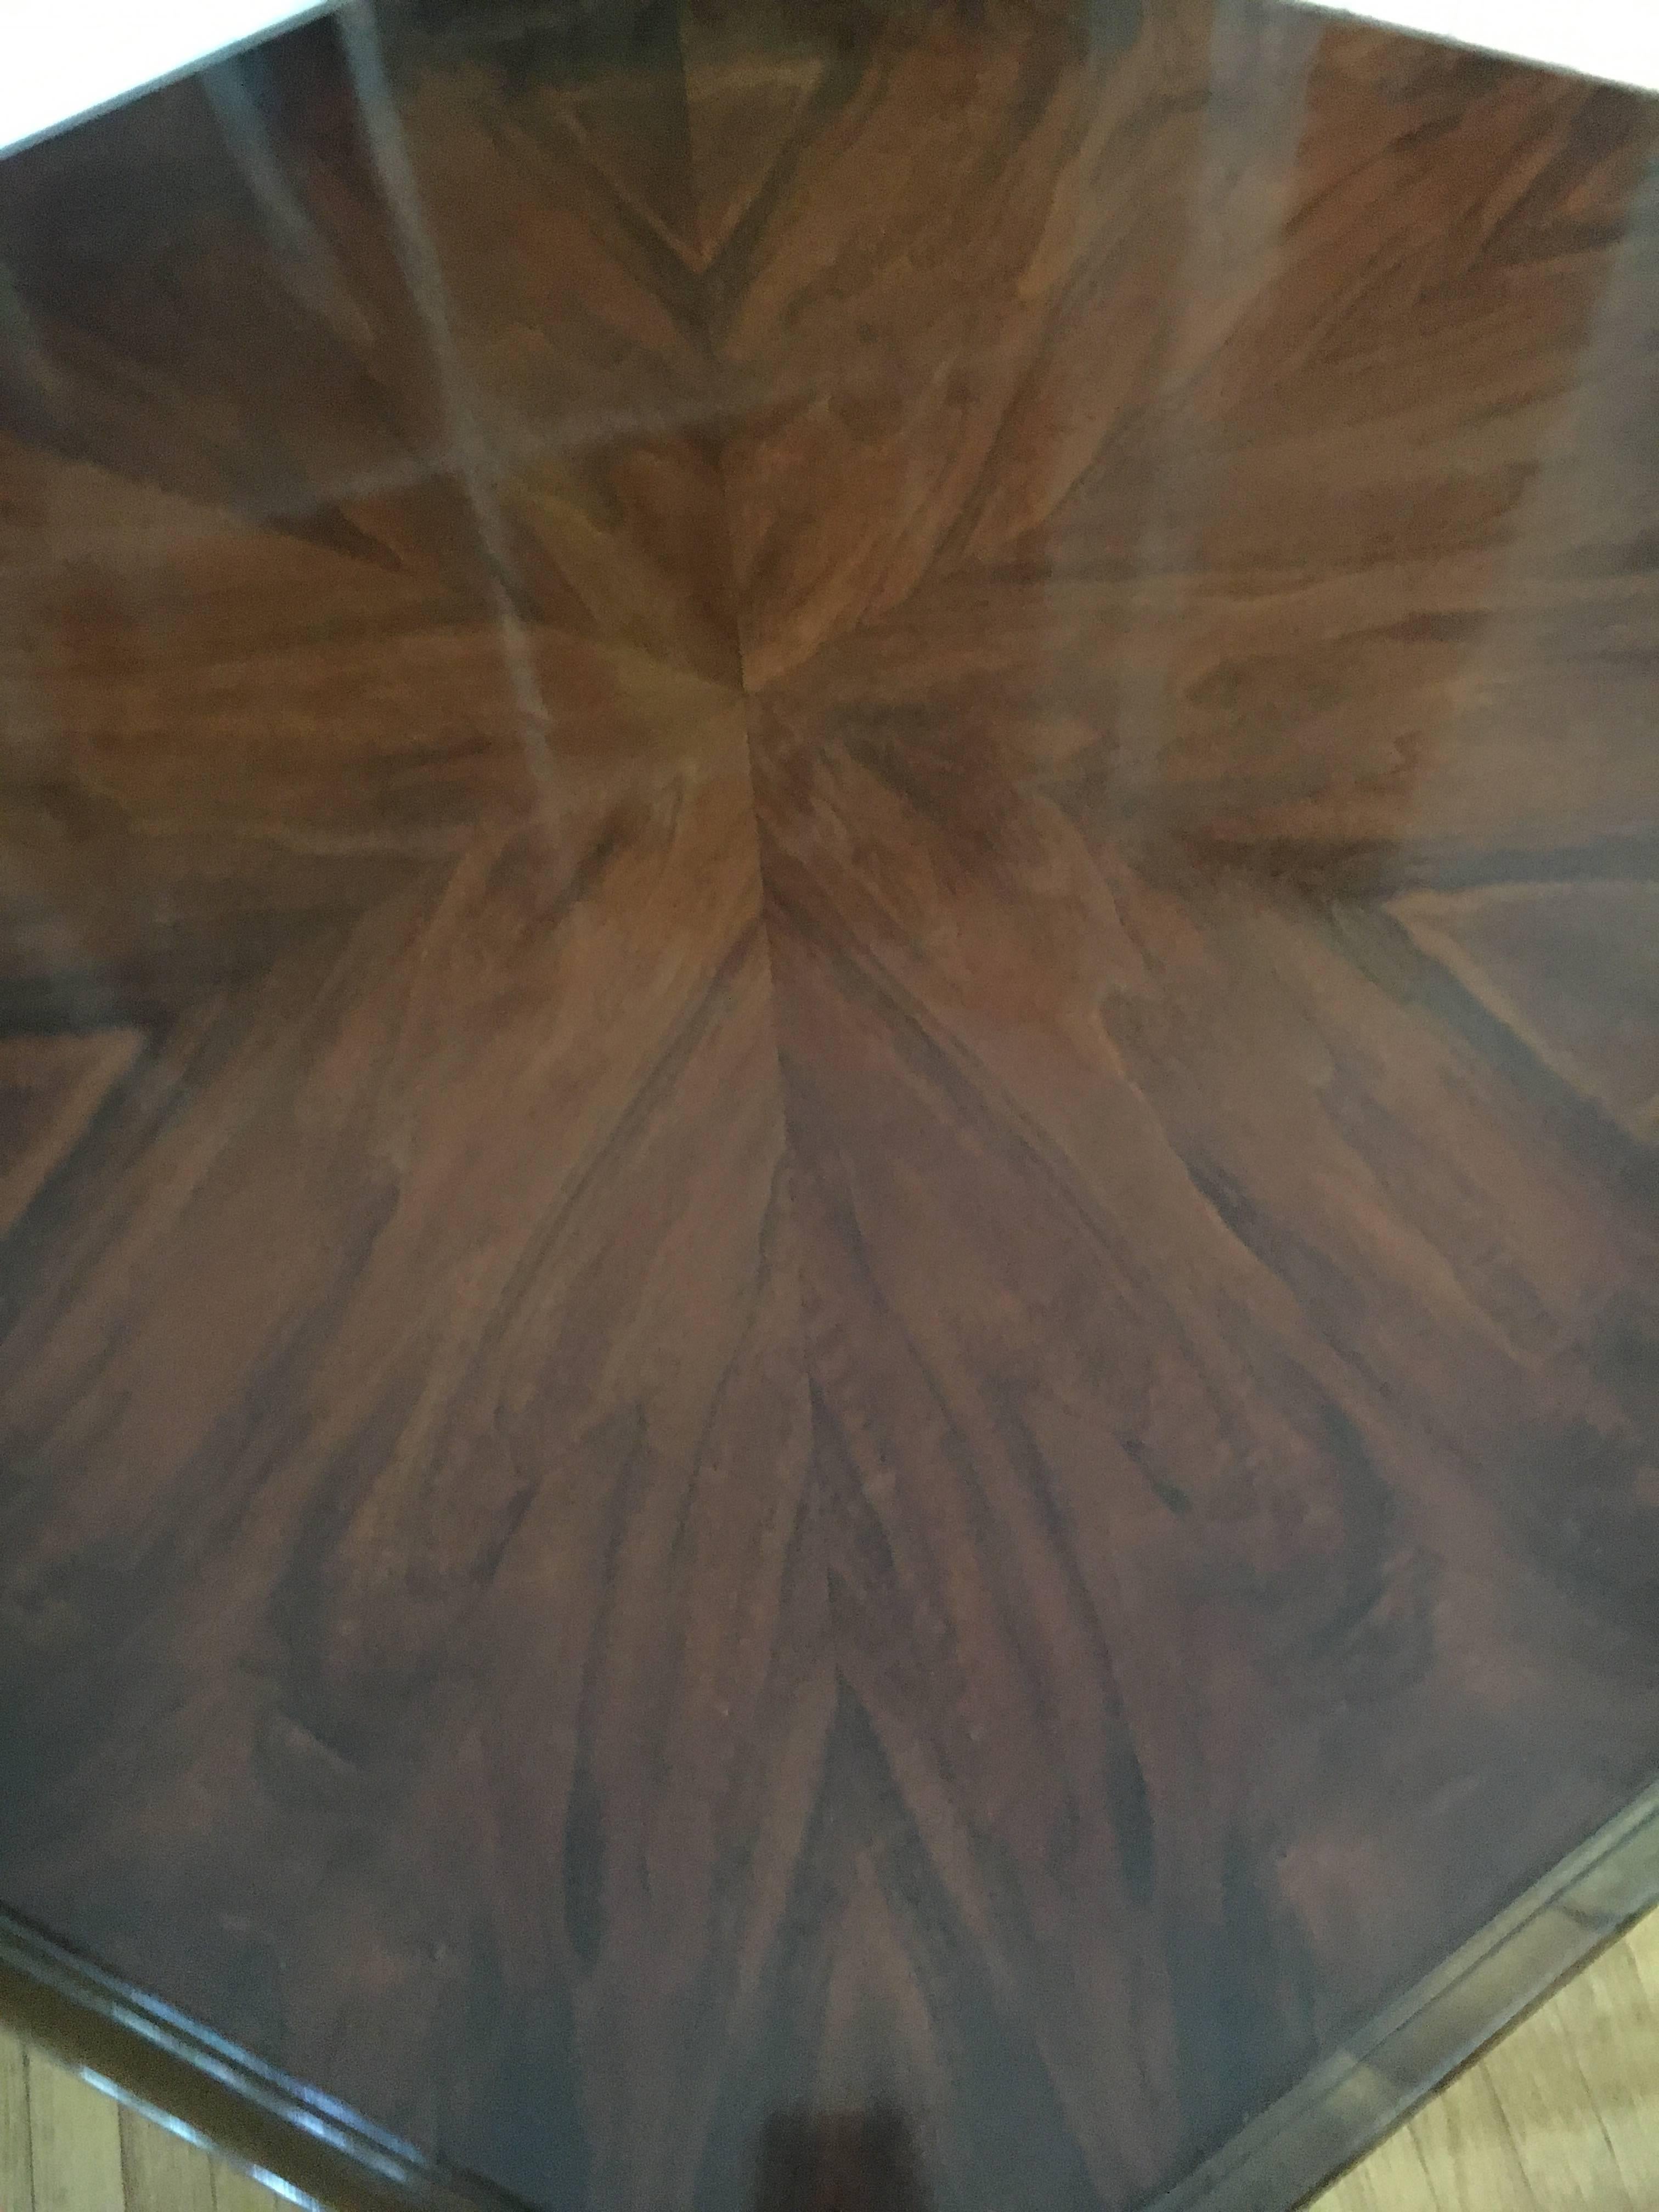 1930 walnut center table - Beautiful hexagon shaped center table, also perfect for a side table in living space or bedroom.